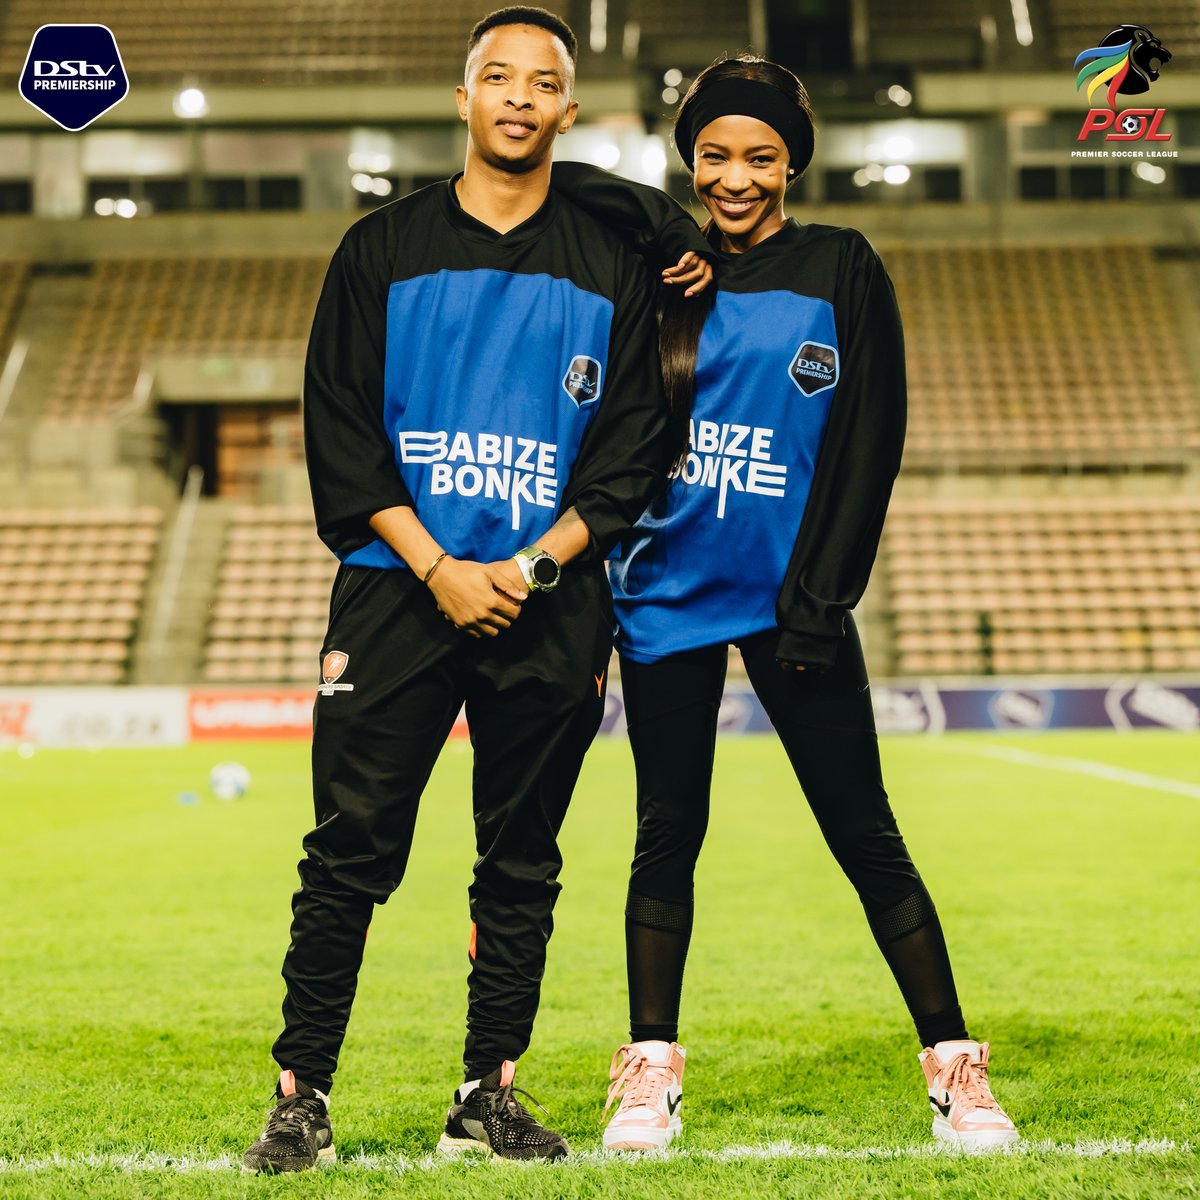 Our #AmaFanDayz goalkeepers Oros Mampofu and Siyasanga Mfenyana are geared up for the challenge!

Let’s see how many saves they can make tonight 🥅🧤